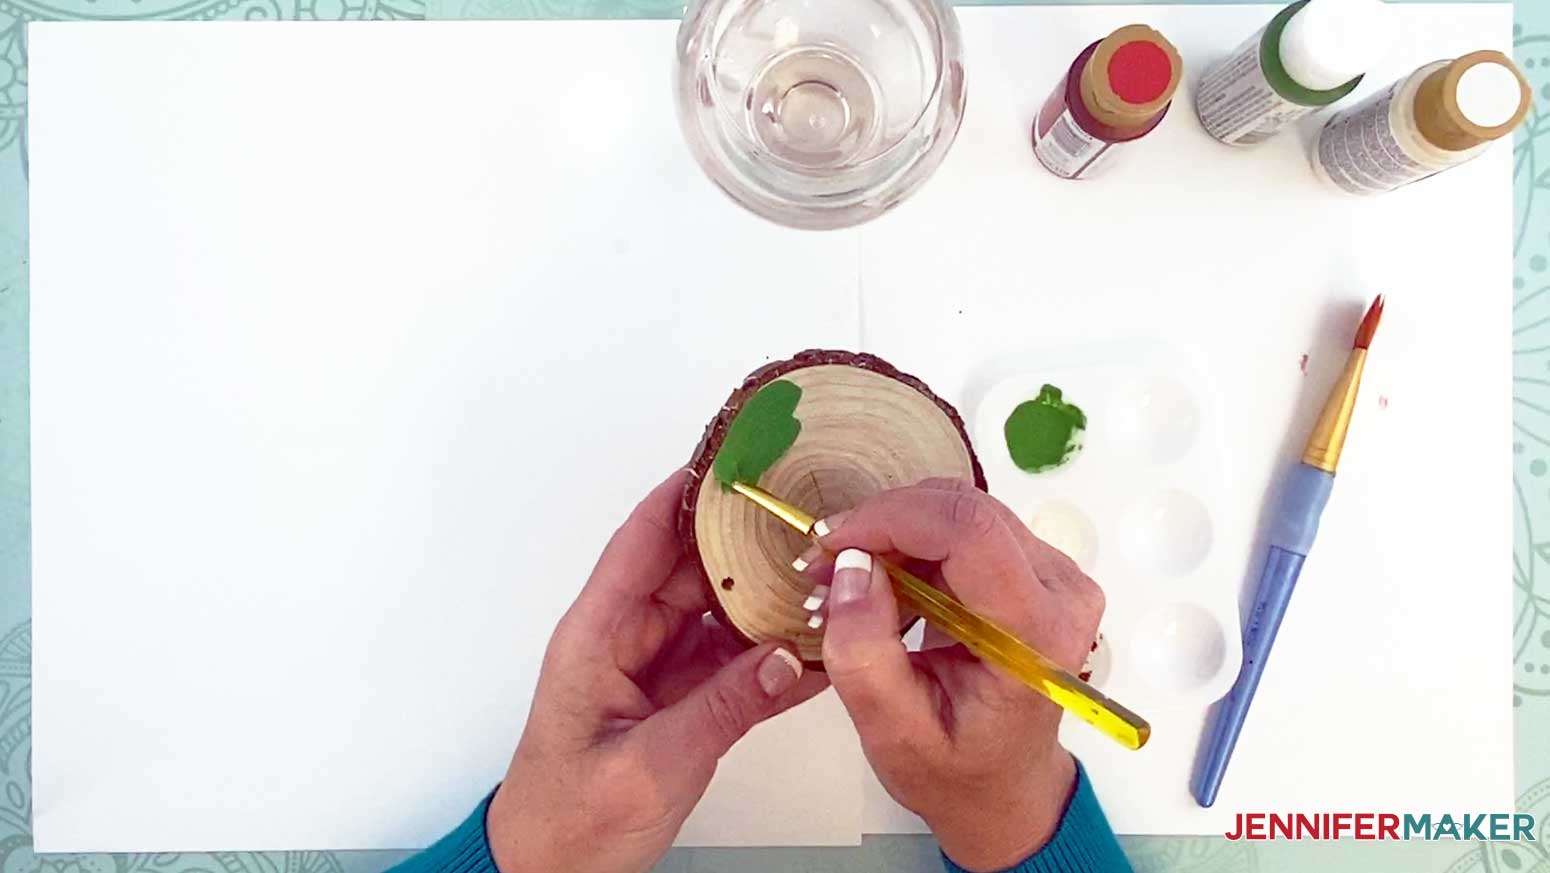 Use a small paint brush to paint around the edge of the wood slice ornament